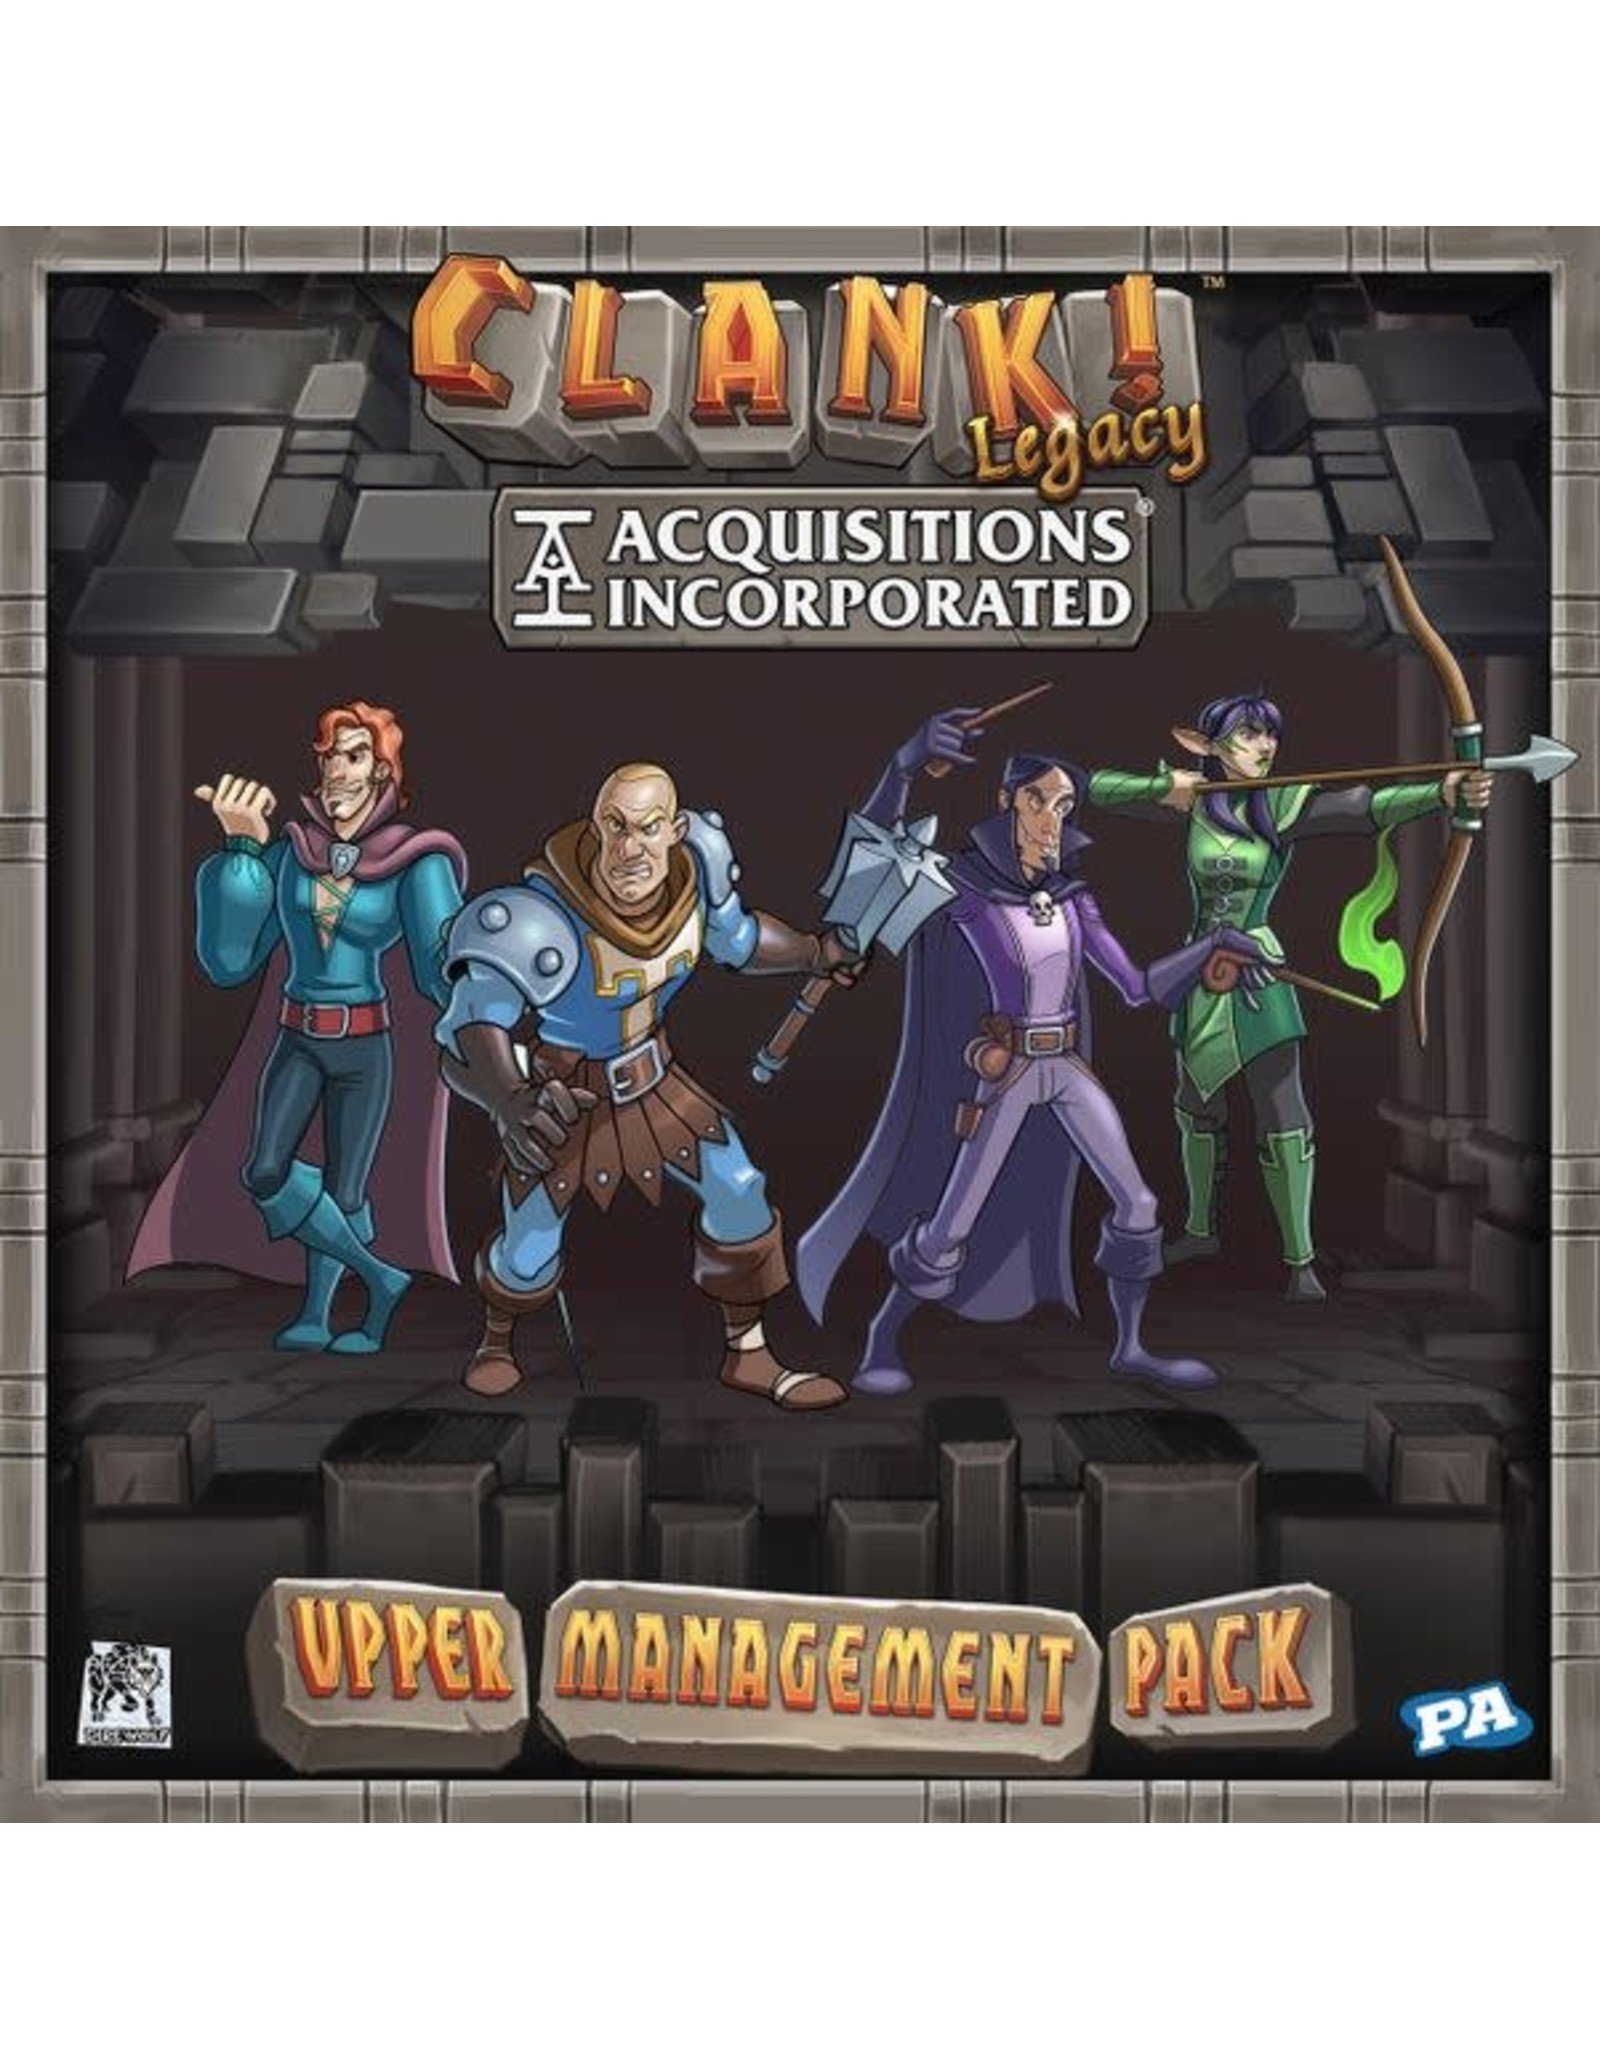 Renegade Clank! Legacy: Acquisitions Incorporated Upper Management Pack